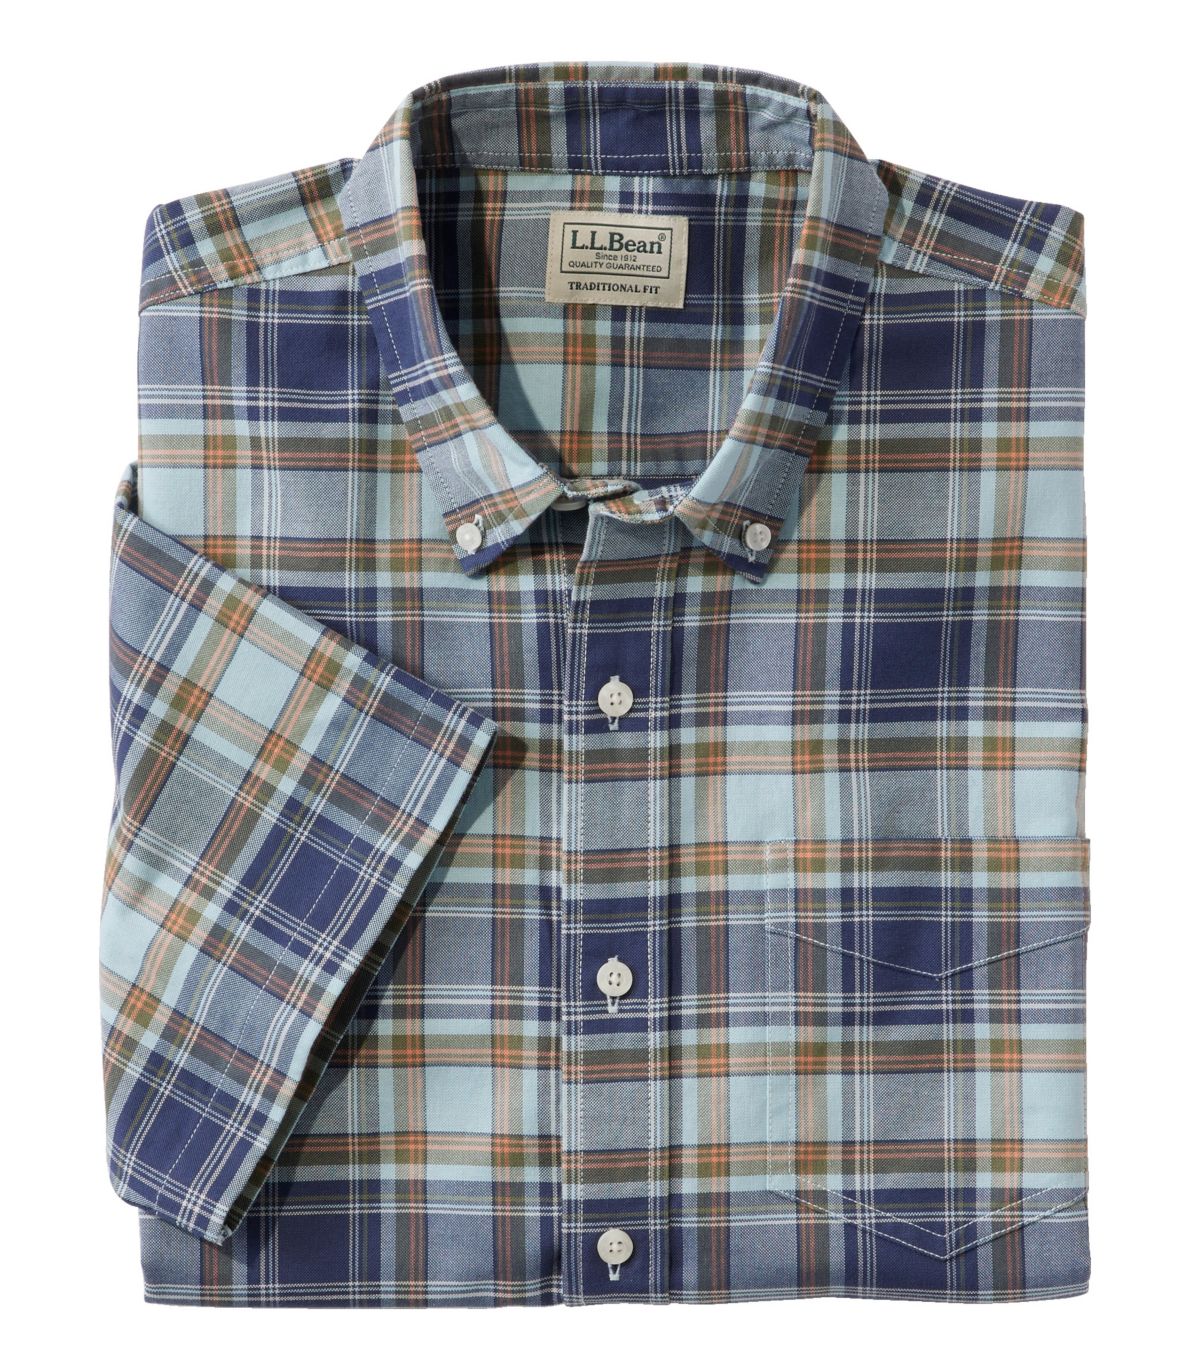 Men's Comfort Stretch Oxford, Traditional Untucked Fit, Short-Sleeve, Plaid